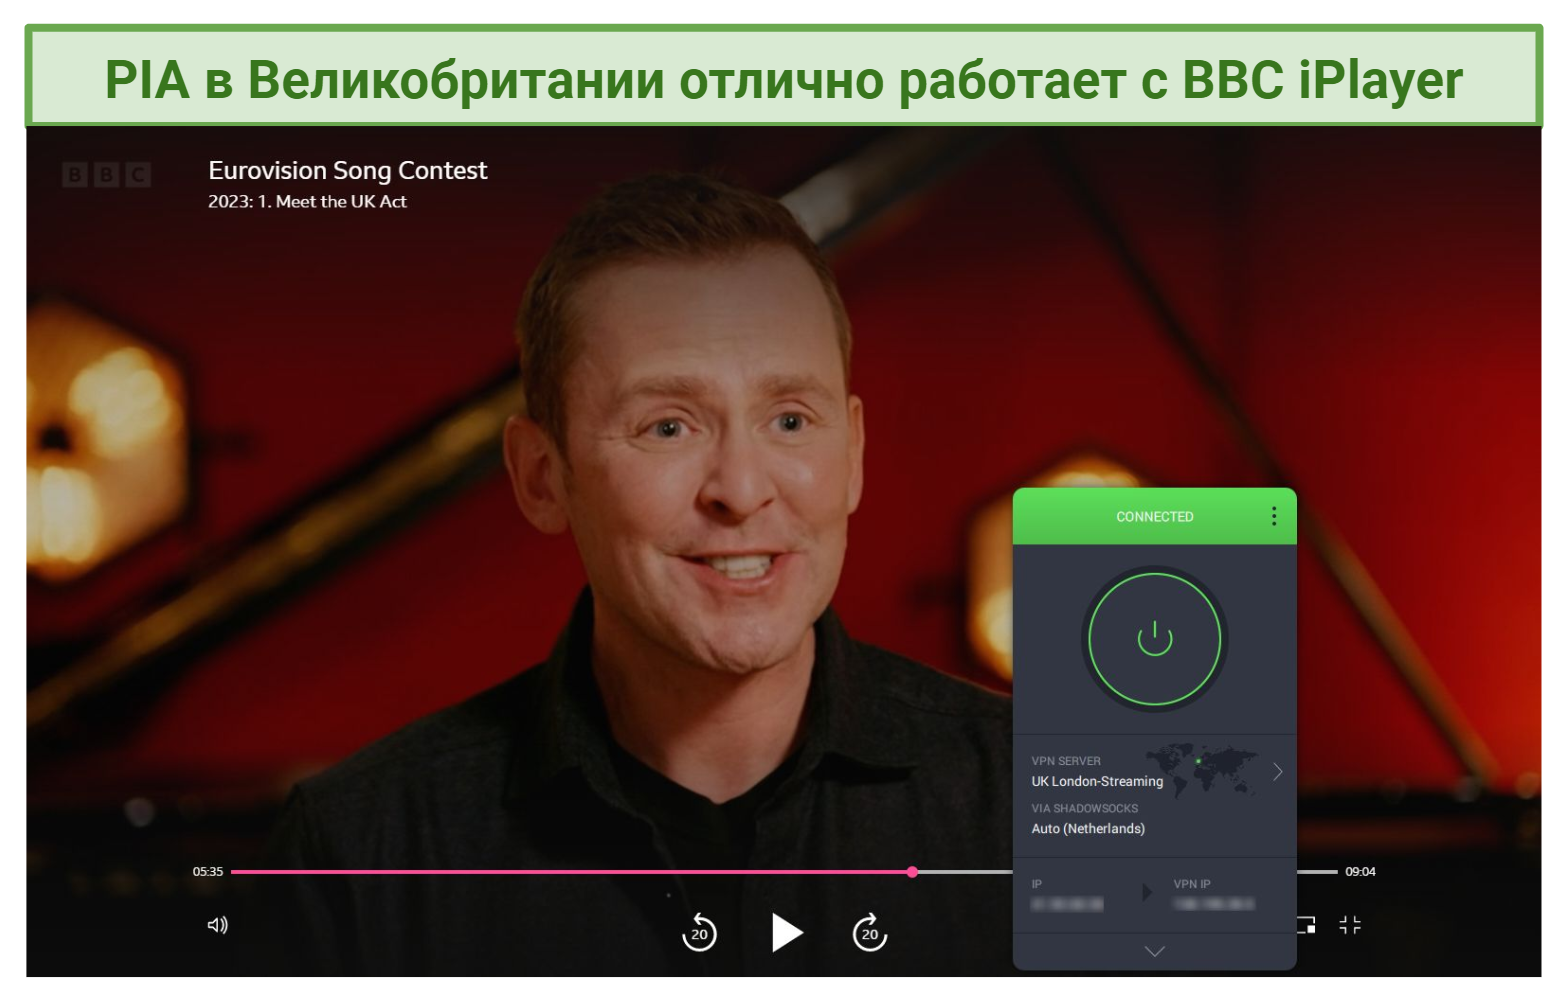 Screenshot showing Mae Muller’s interview with Scott Mills playing on BBC iPlayer with PIA connected to the UK-London Streaming server